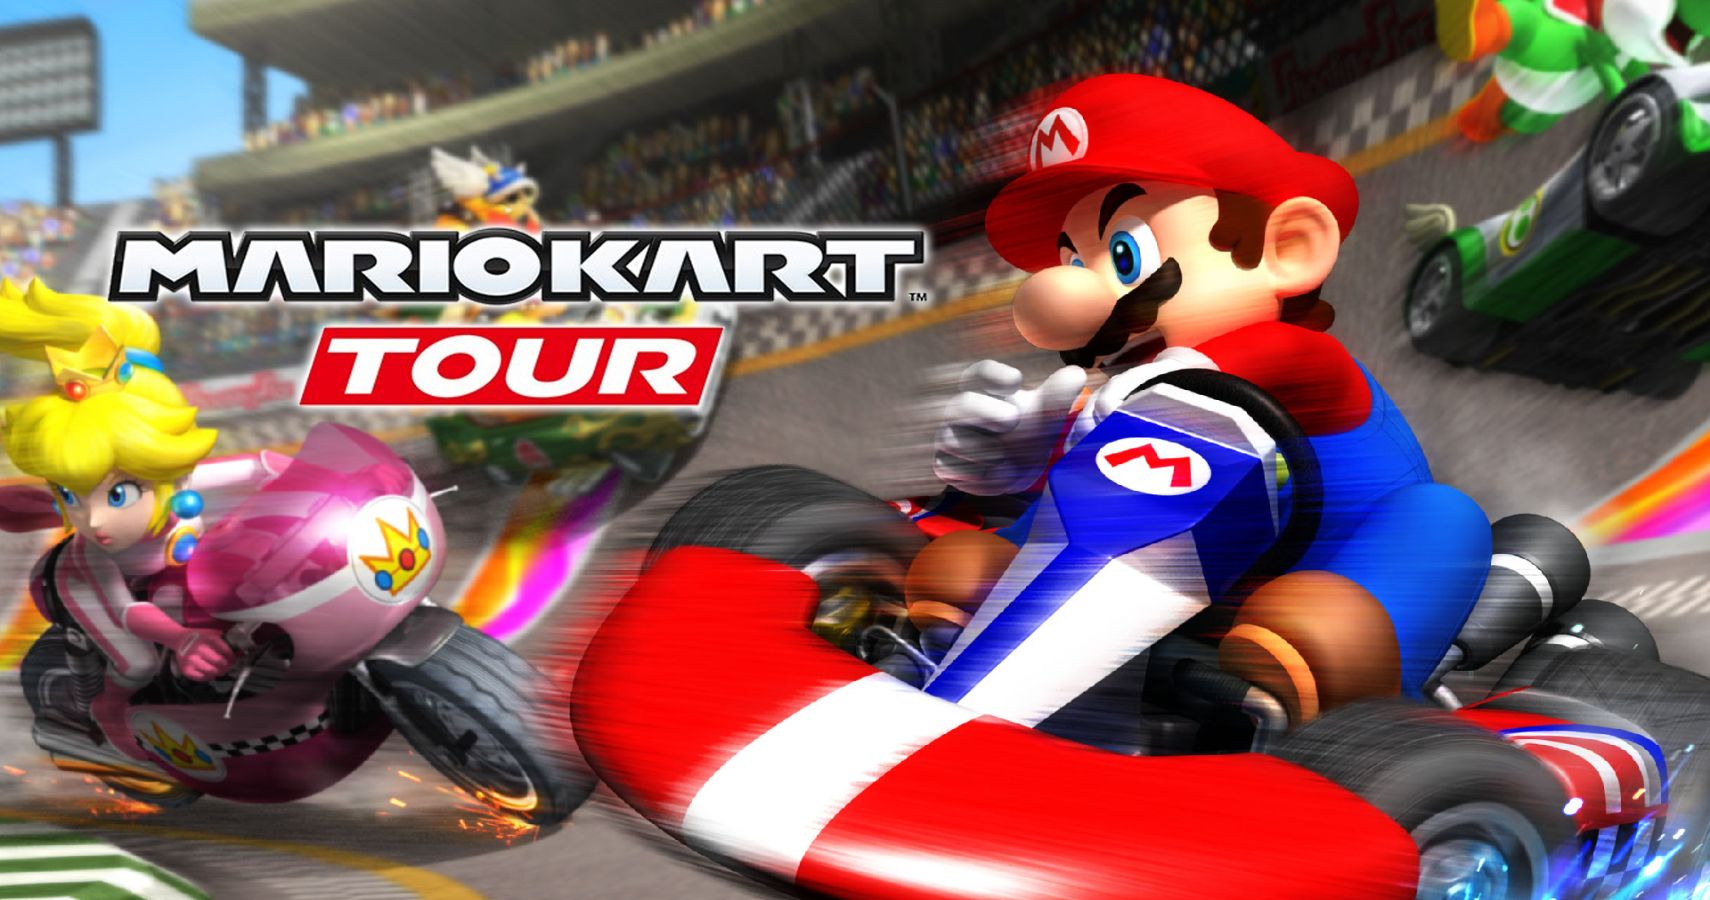 The Night Tour begins in the Mario Kart Tour game